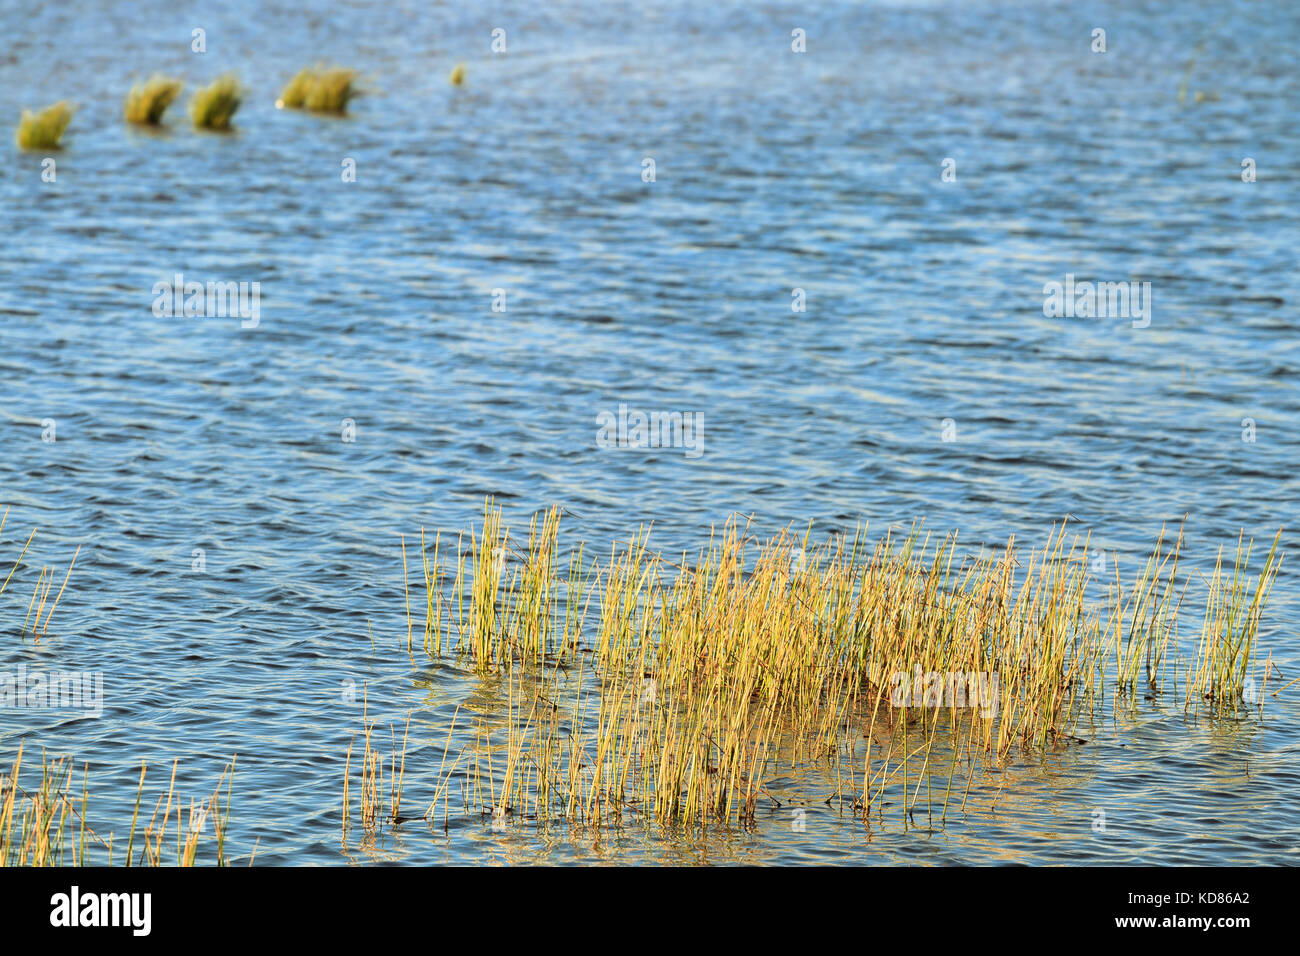 Grass growing out of the water in warm tones Stock Photo